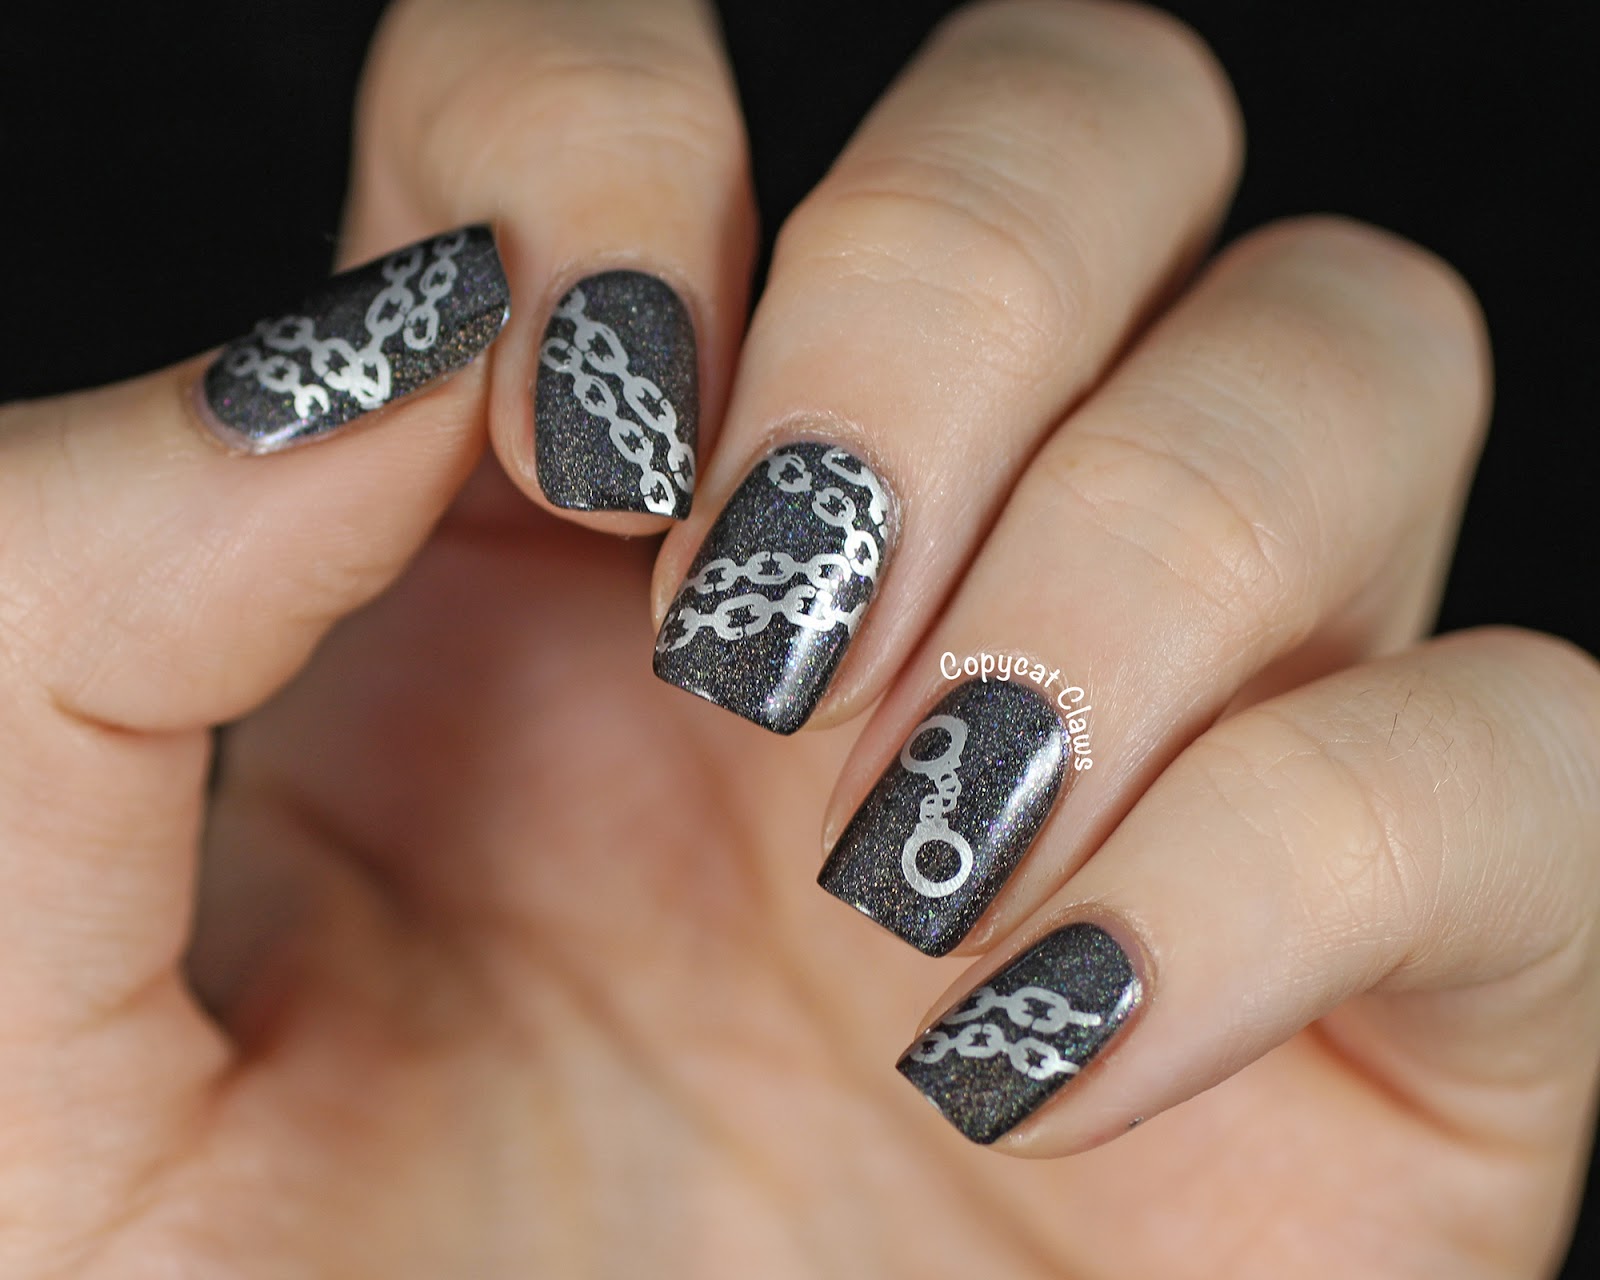 Handcuff Nail Art for a Fun and Edgy Look - wide 5